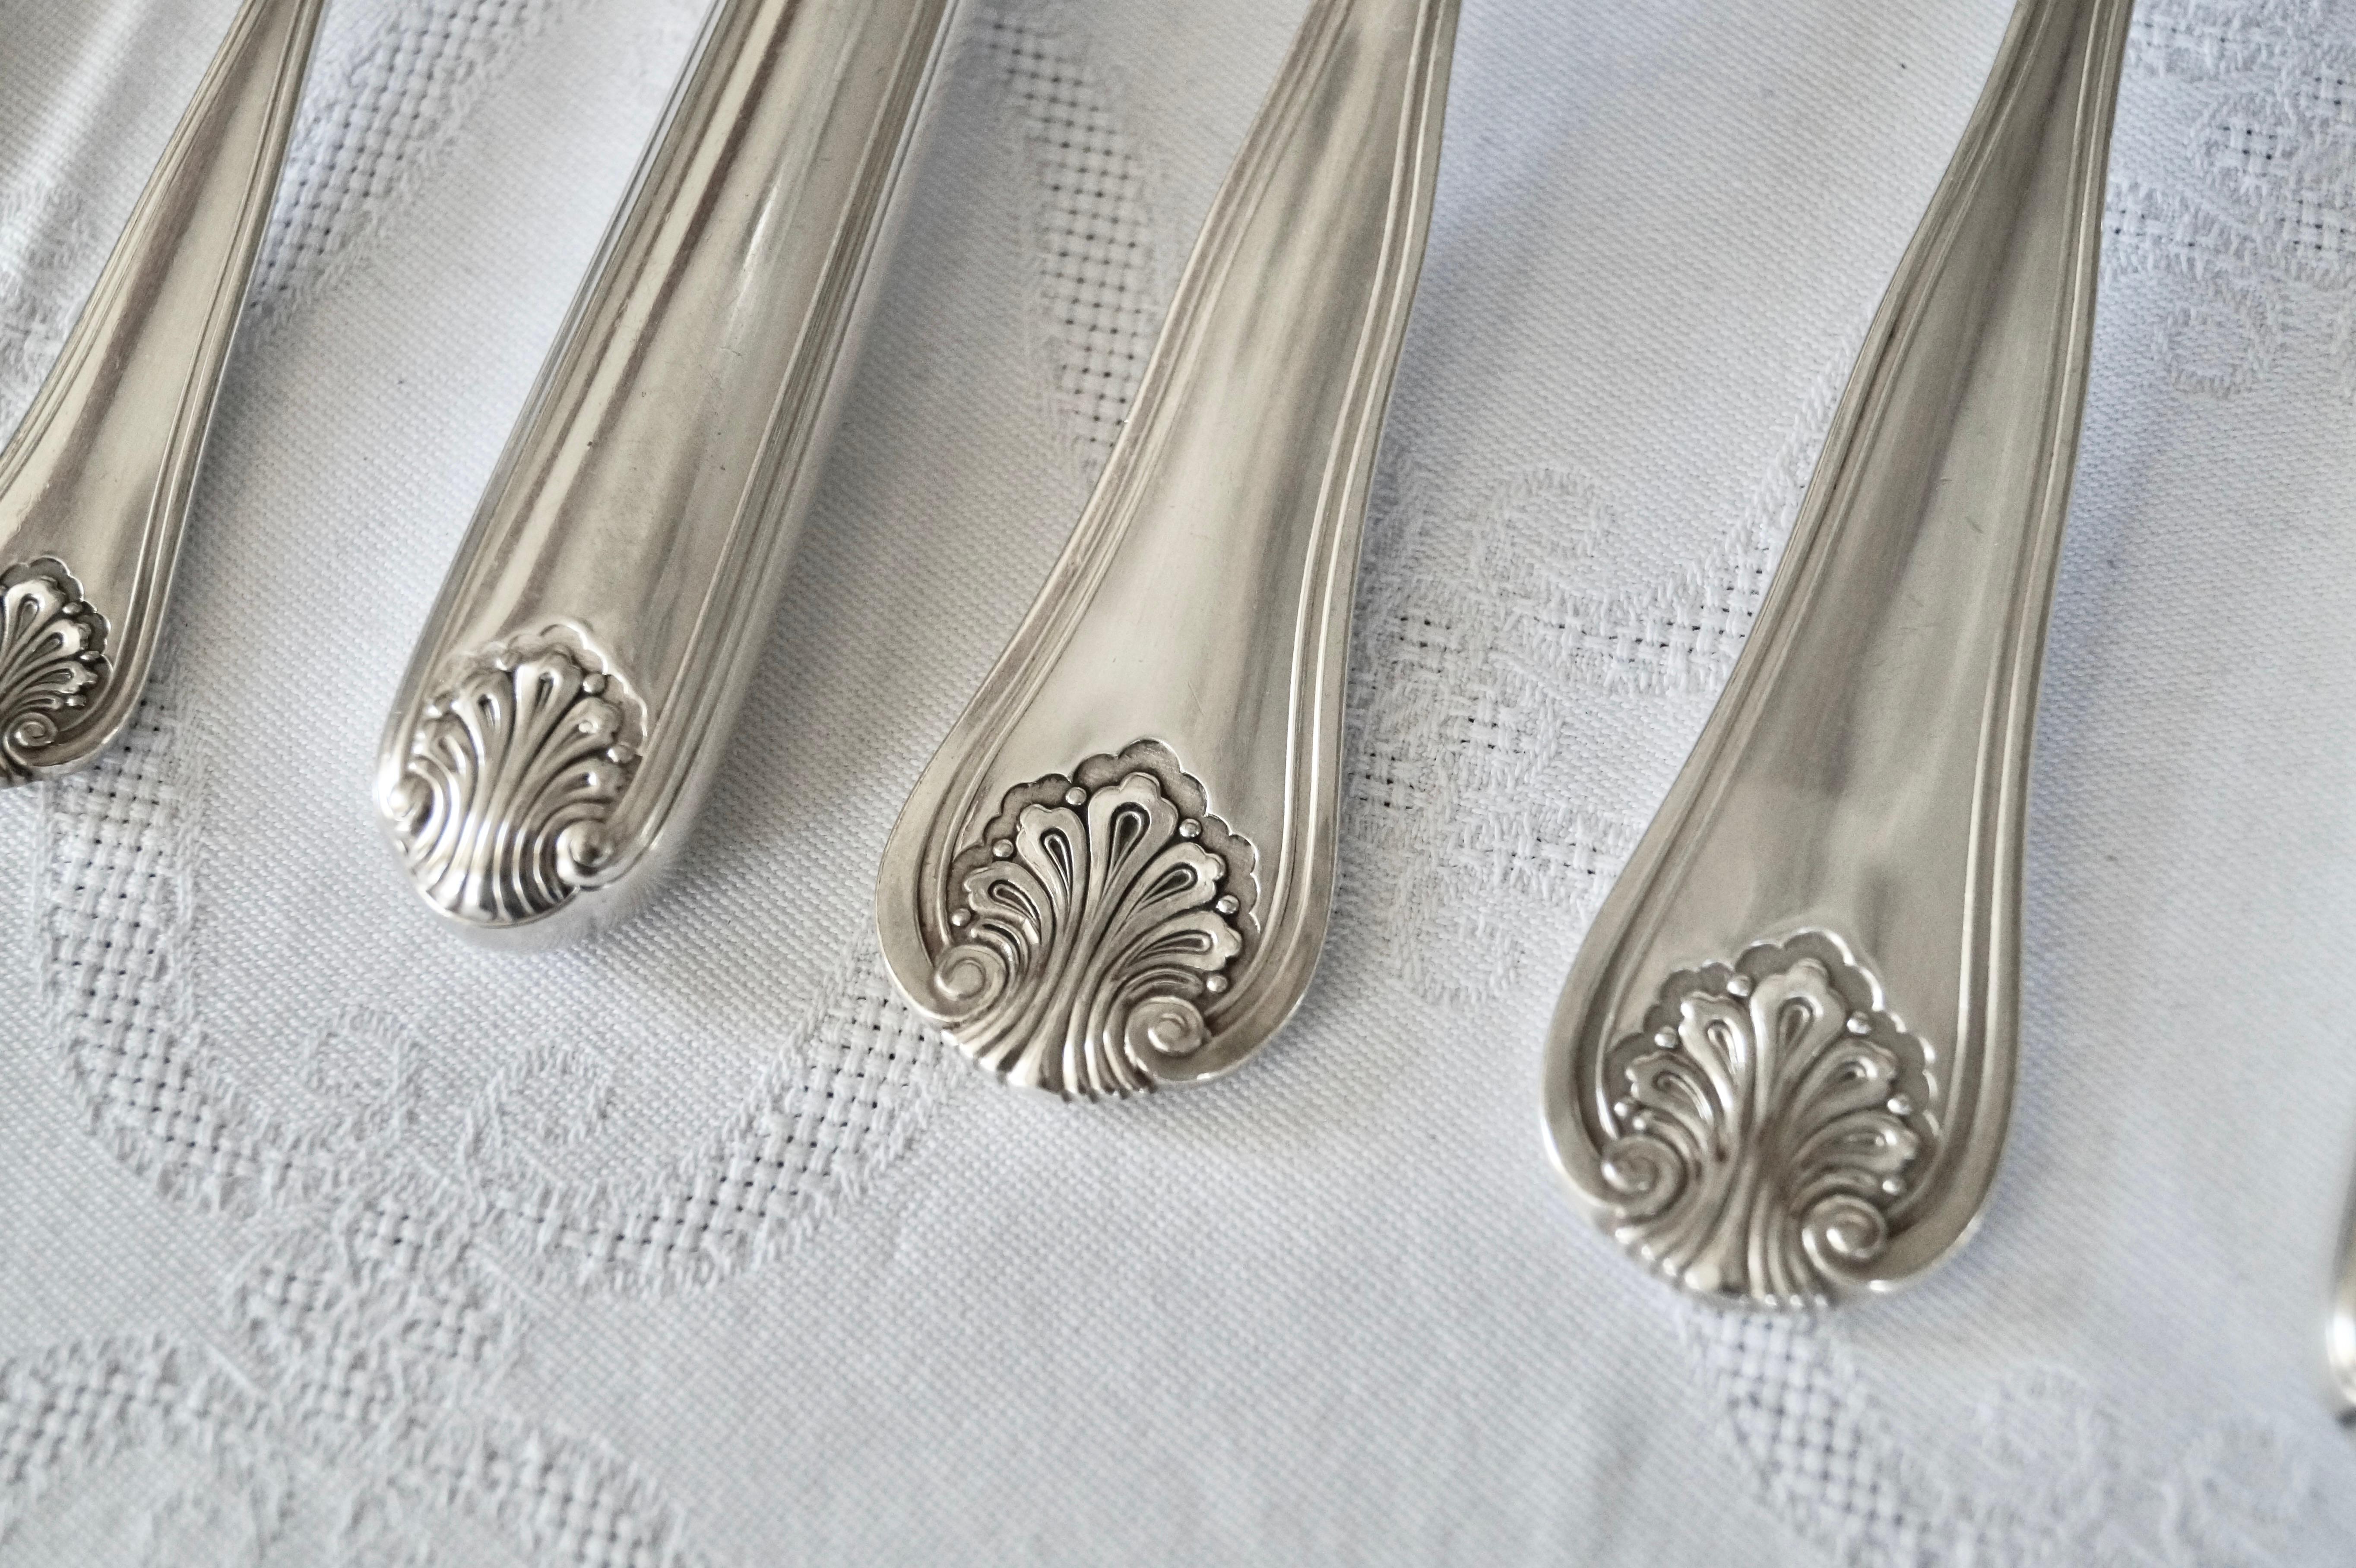 Cast Set of Antique French Silver-Plated Cutlery 